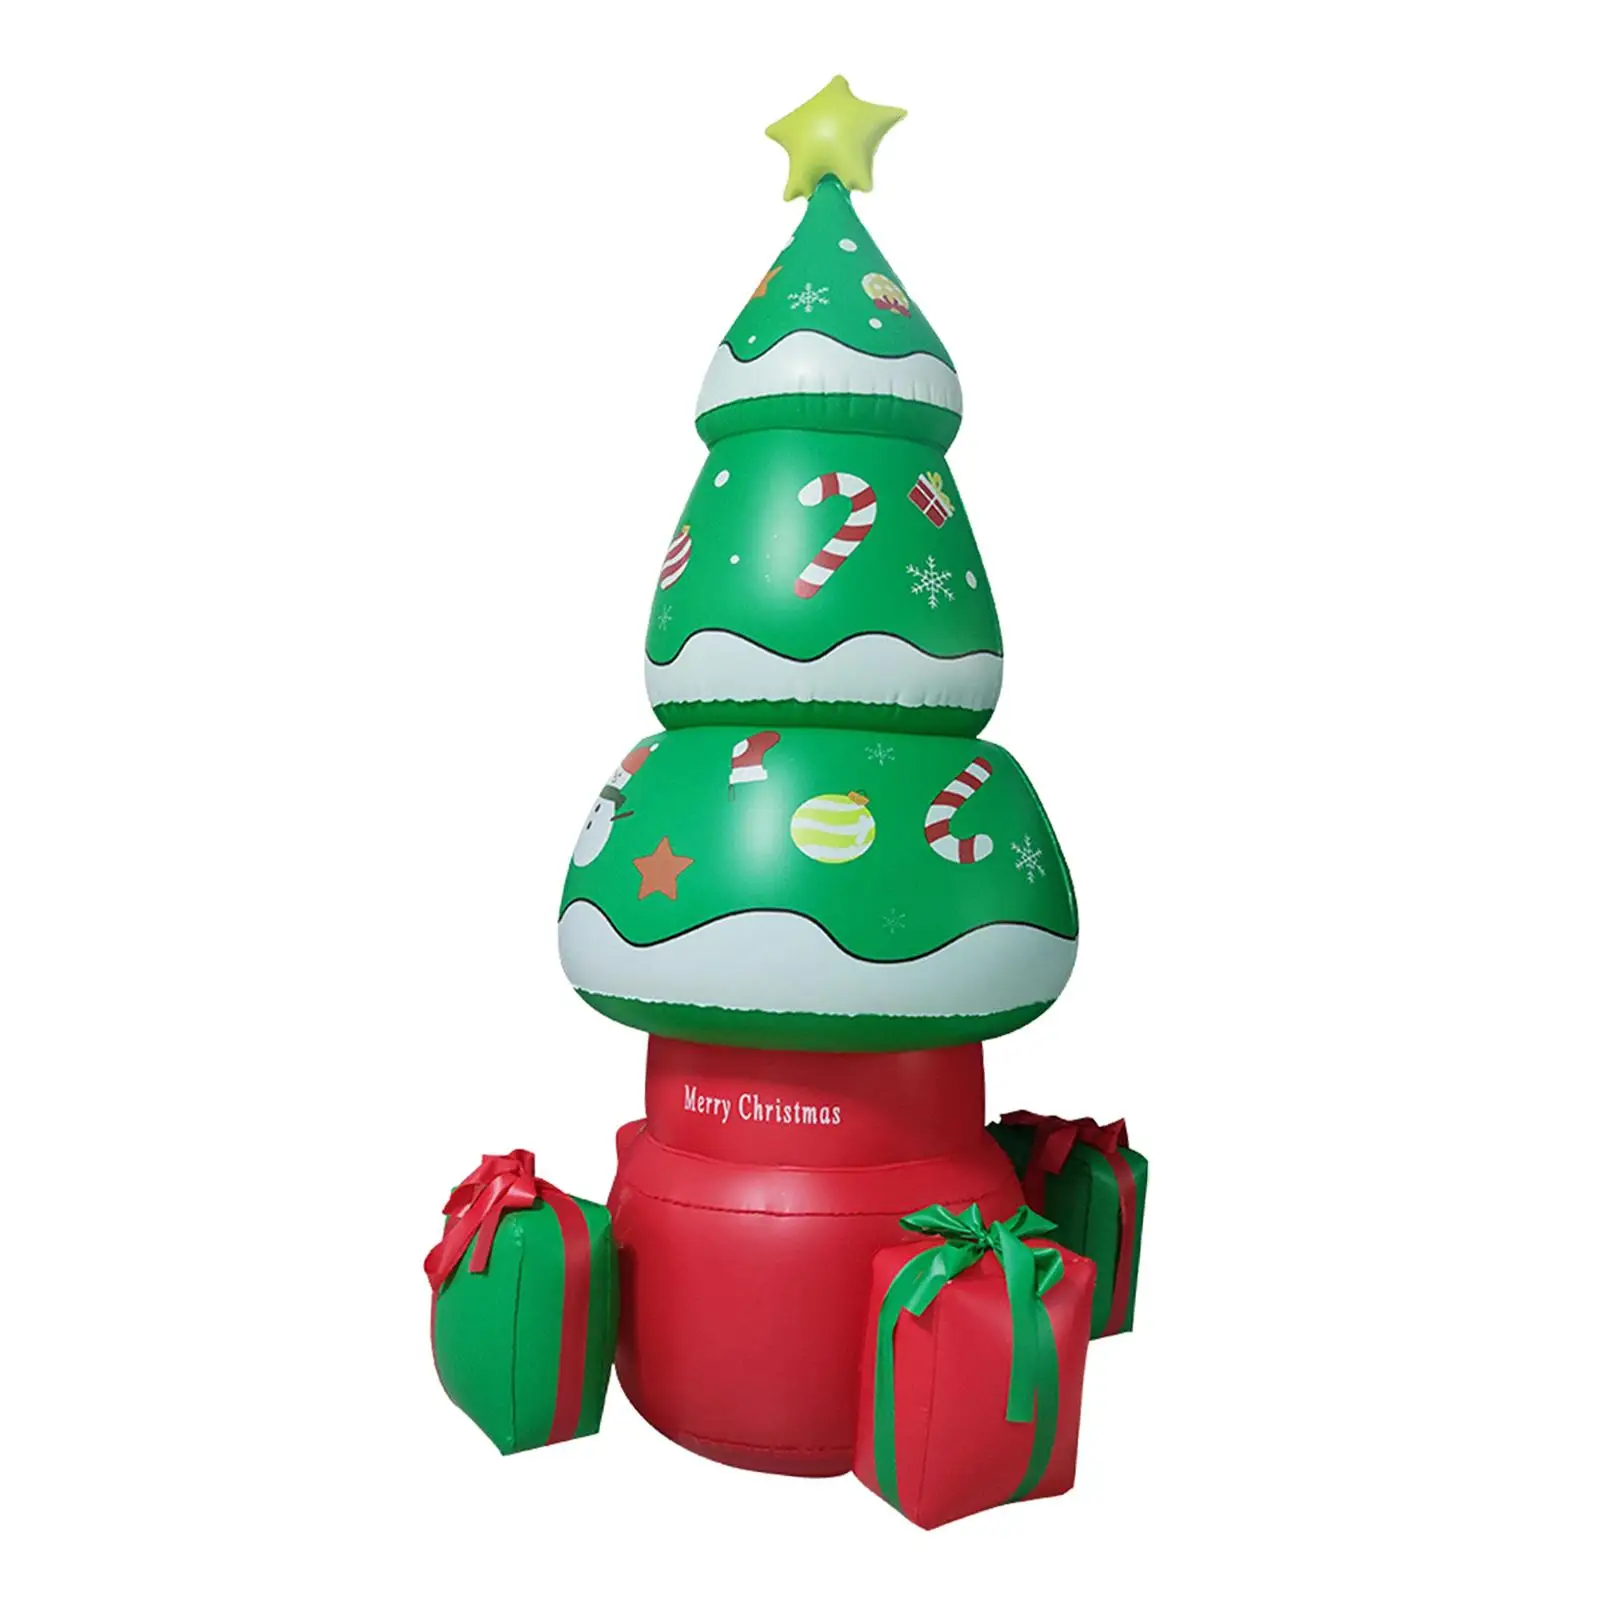 Inflatable Christmas Tree Decorative Tree Xmas Tree Light up for Lawn Holiday Decor Prop